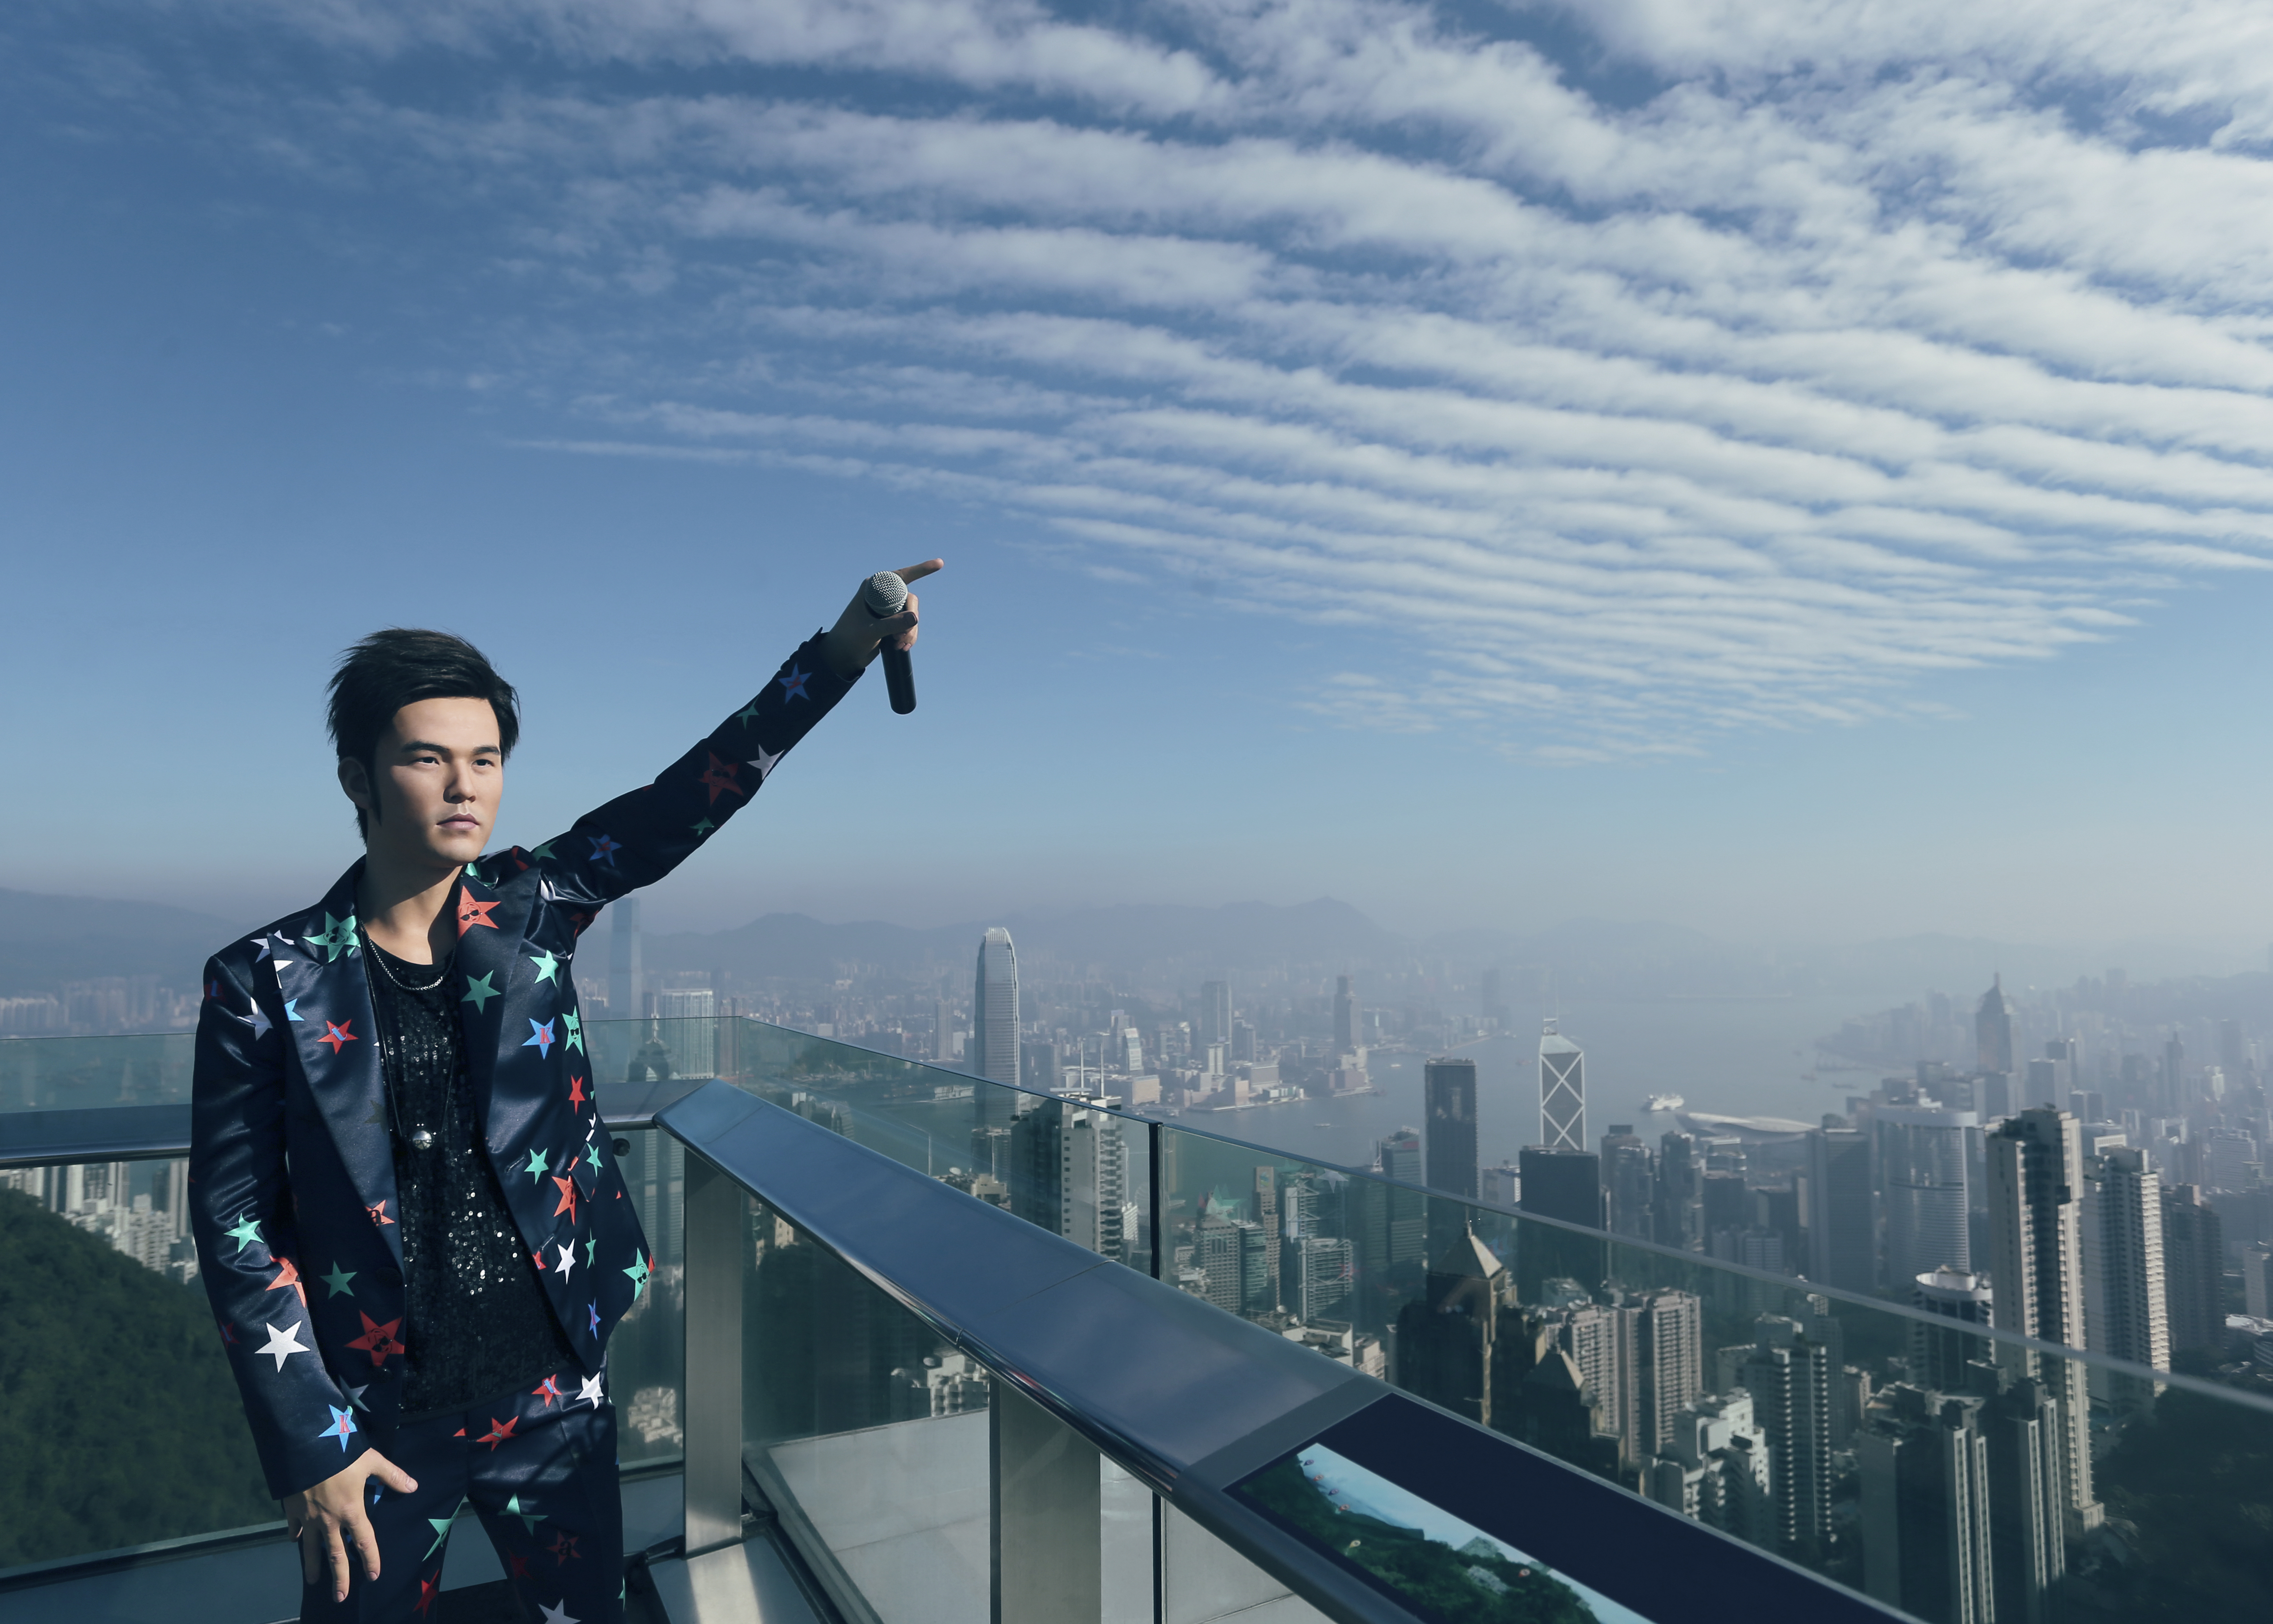 Wax figure of Jay Chou, the renowned Taiwanese singer-songwriter and actor, on display at Madame Tussauds Hong Kong after its restyling in January 2017